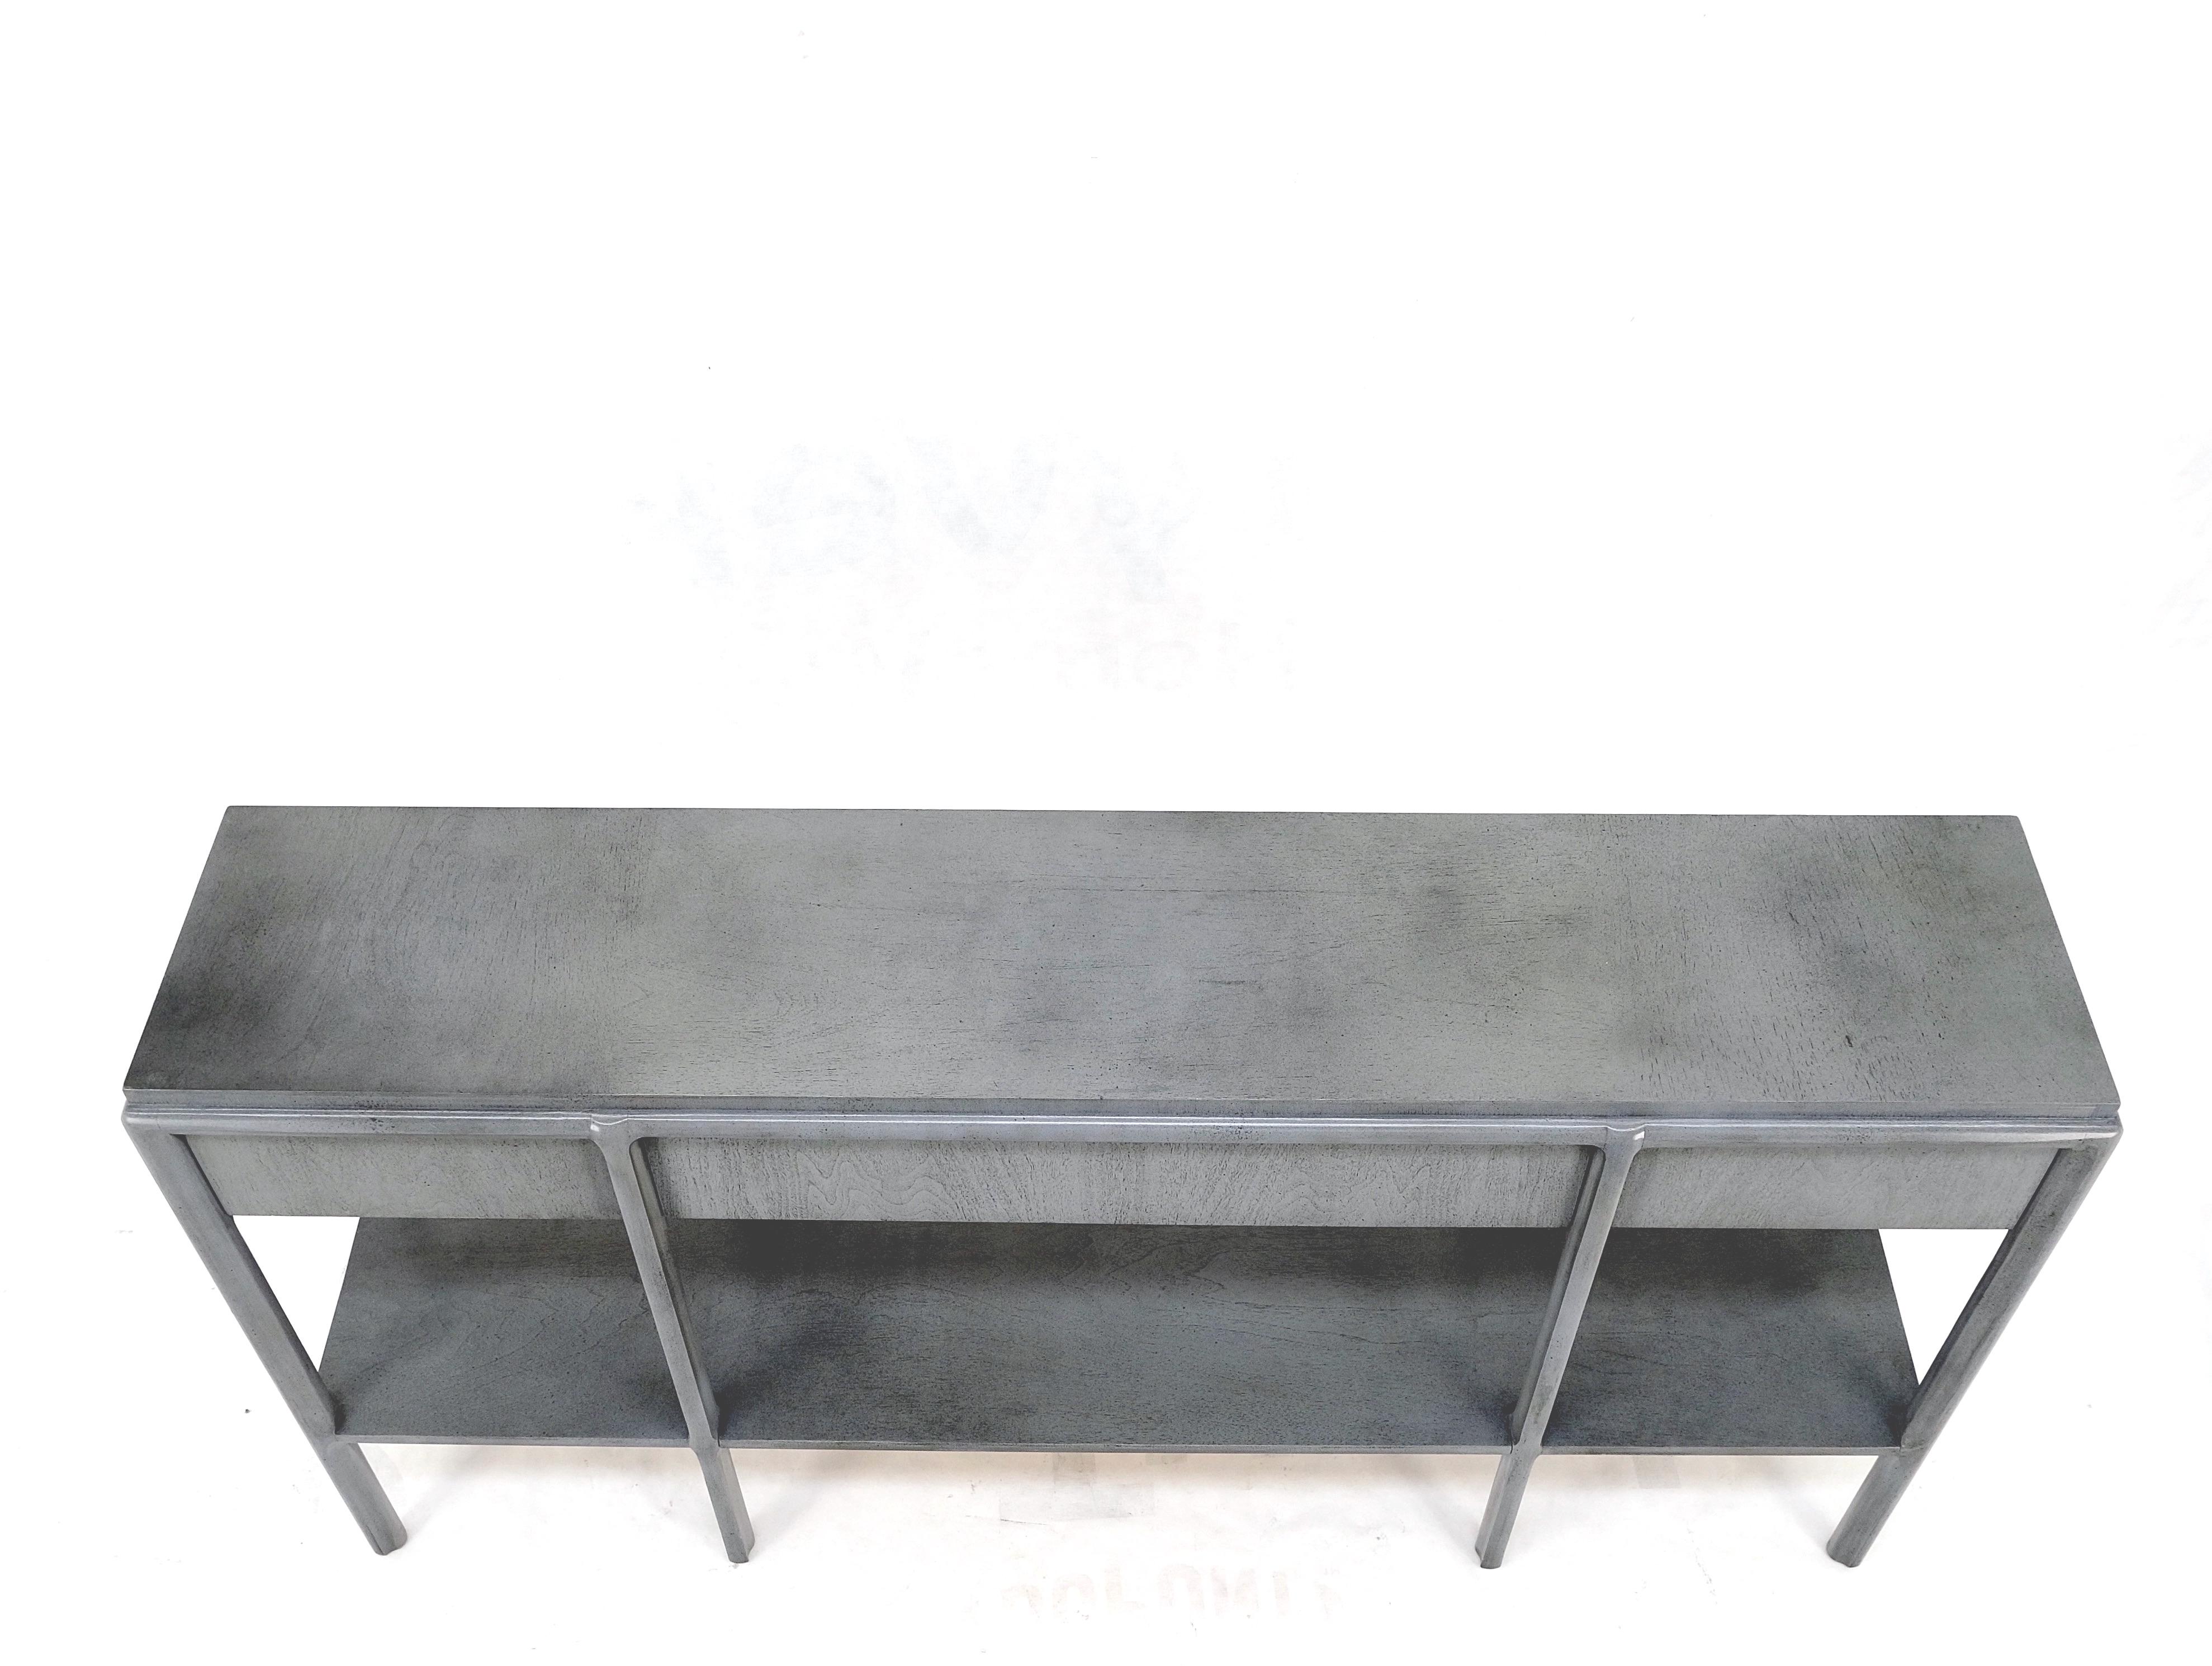 Painted Widdicomb Faux Finish 3 Drawer Long Sofa Console Table Credenza W/ Shelf Mint! For Sale